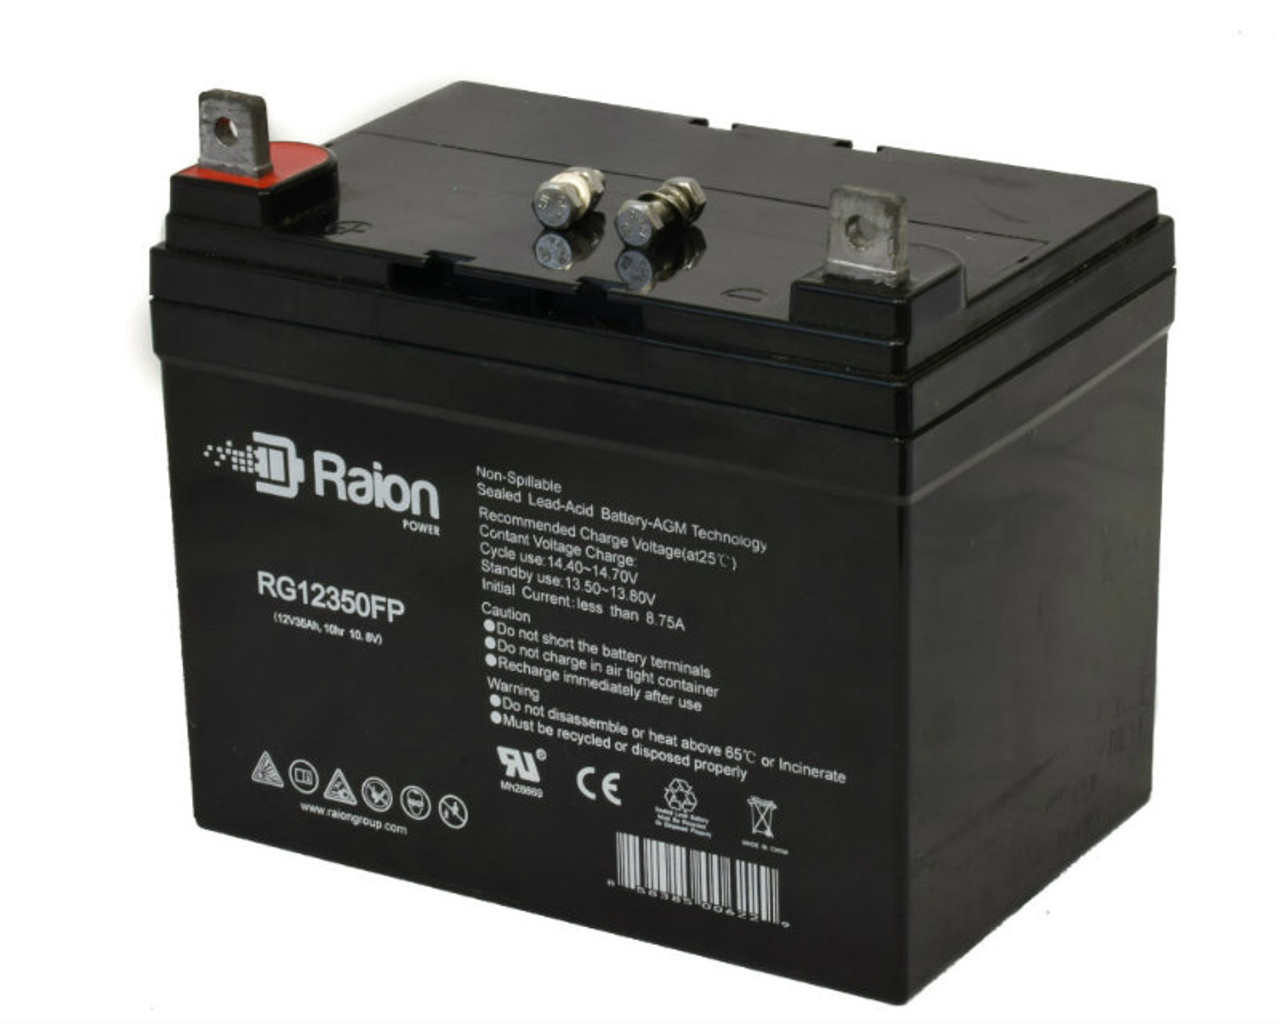 Raion Power Replacement 12V 35Ah Battery for Ariens/Gravely 929000 - 1 Pack